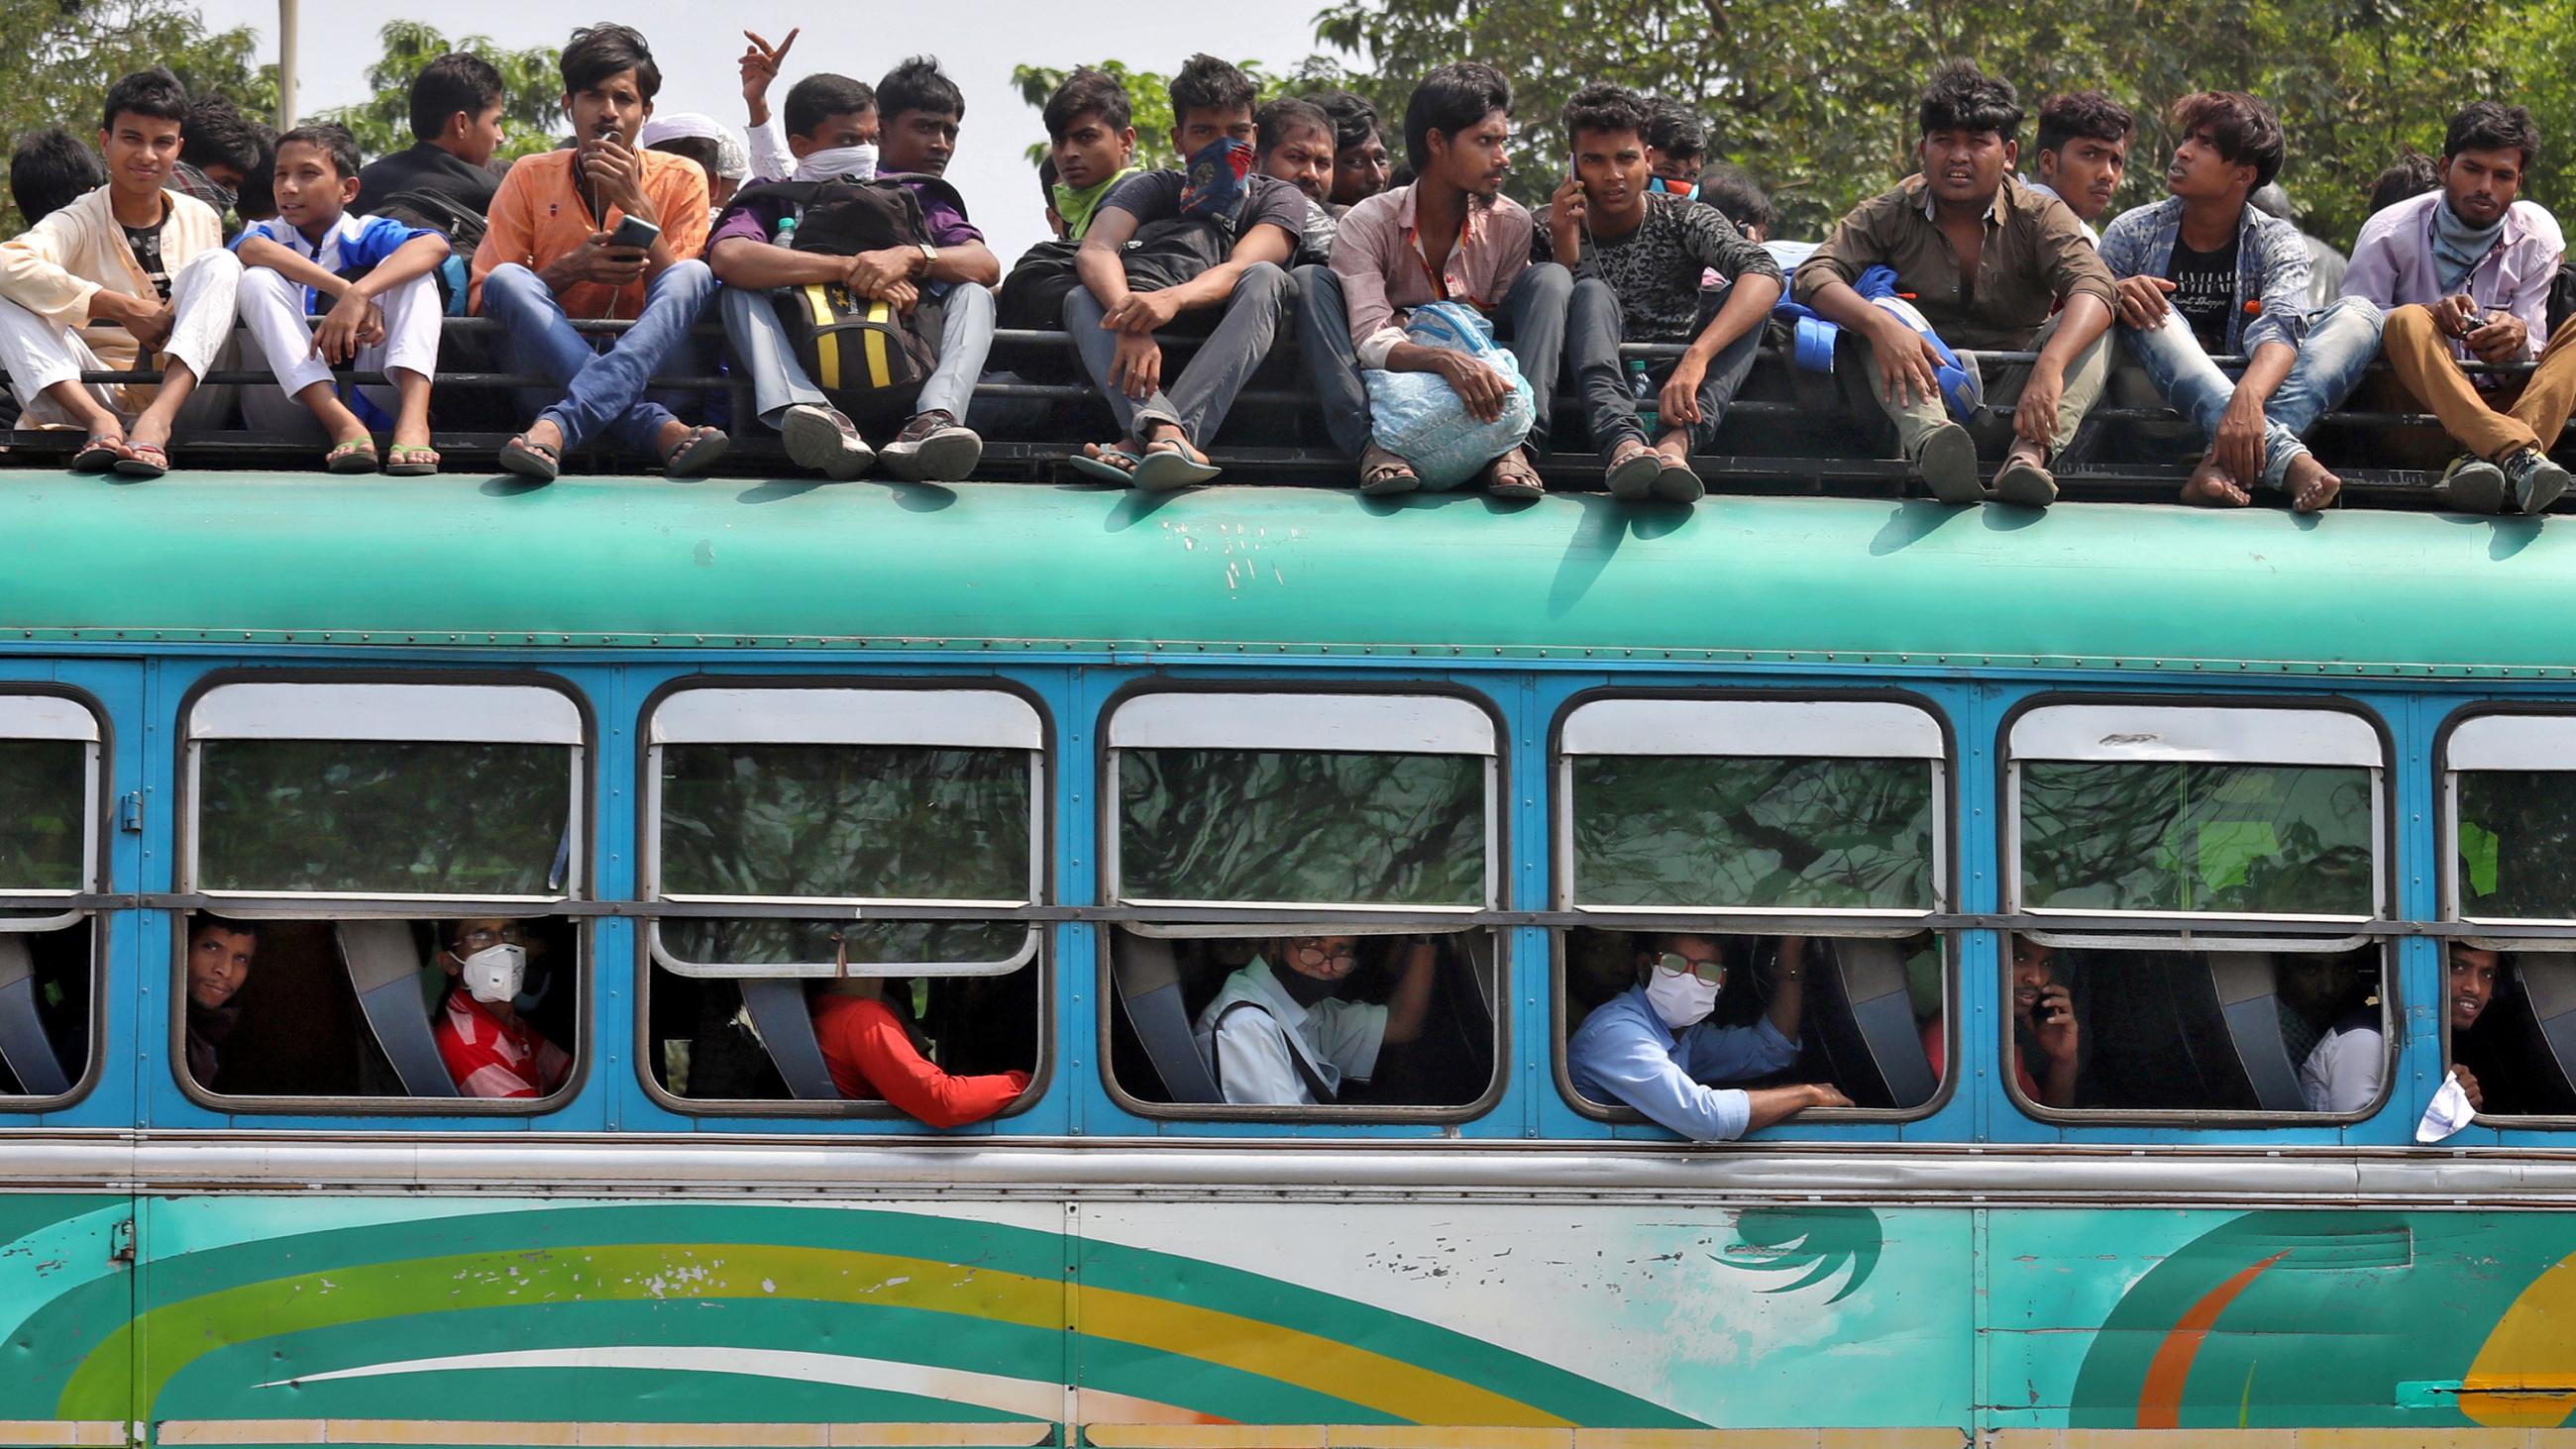 The image shows a green bus, its seats full, with many people sitting on top of the vehicle. 